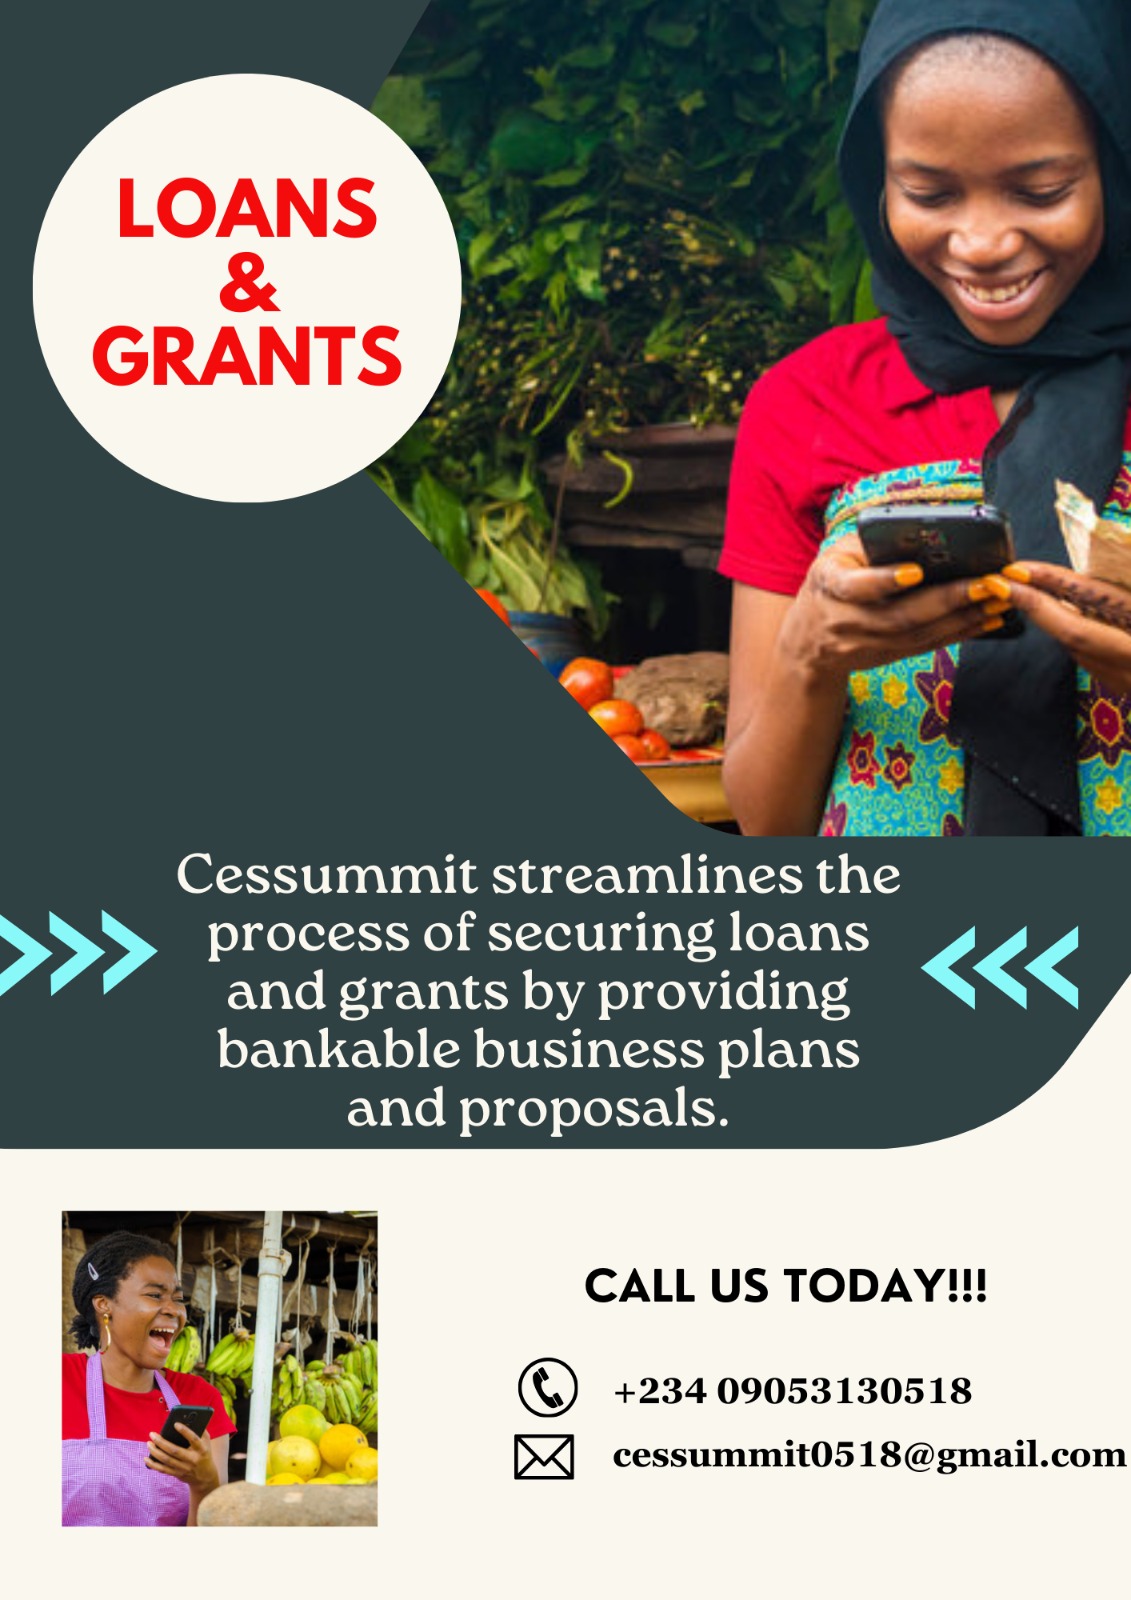 How to Obtain a Business Loan and Grant